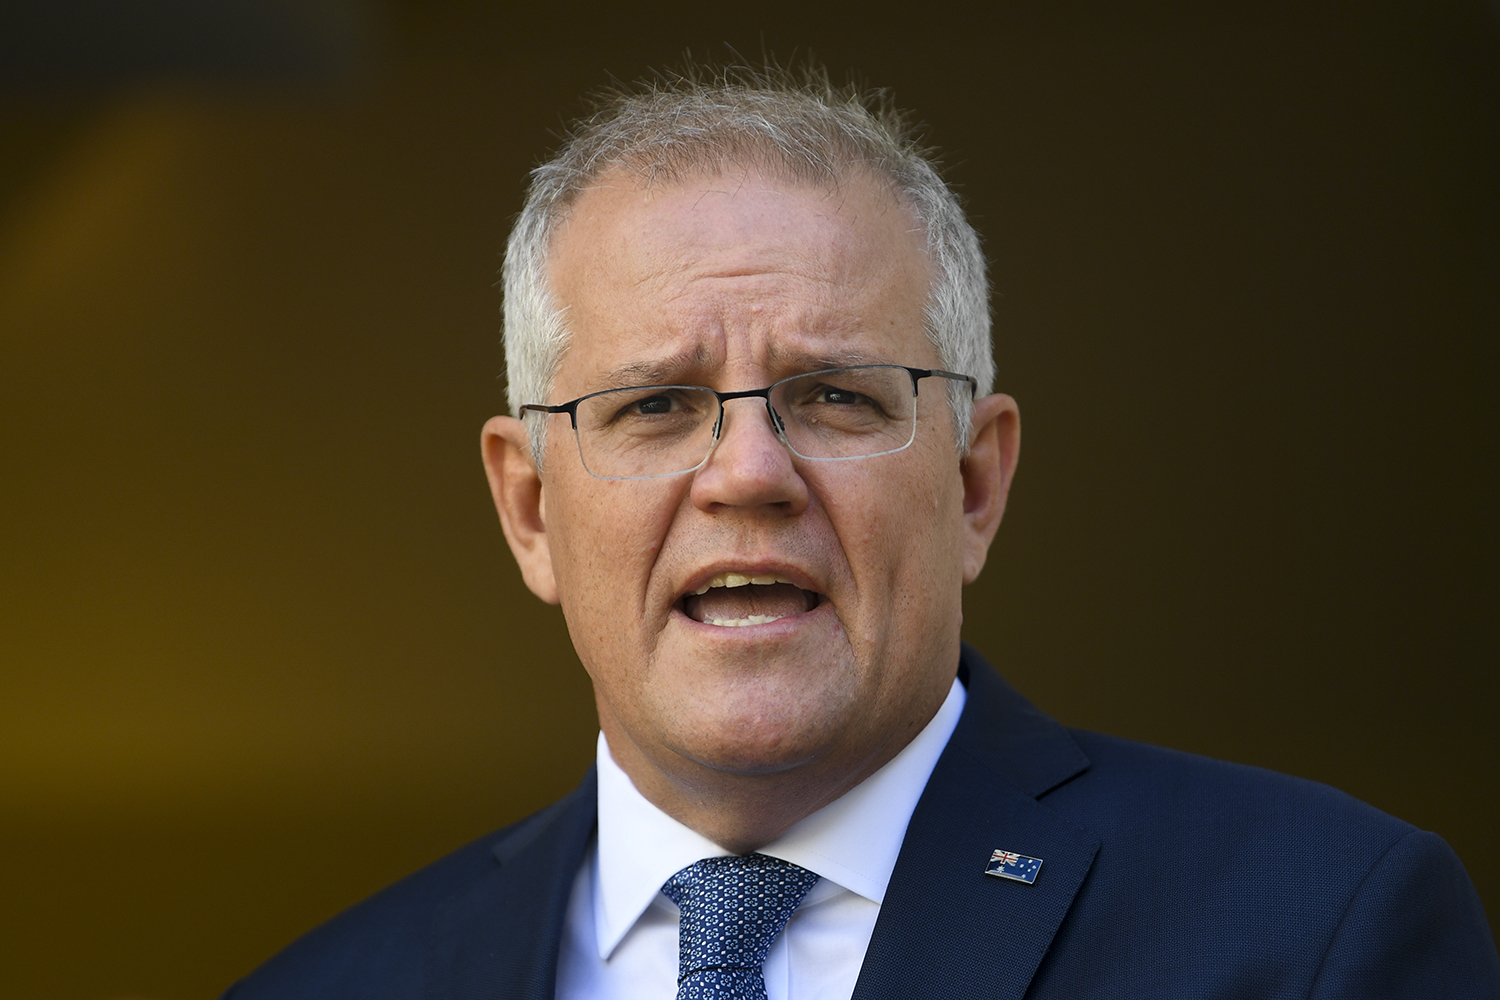 Australian Prime Minister Scott Morrison speaks during a press conference at Parliament House in Canberra, Monday, January 10, 2022.